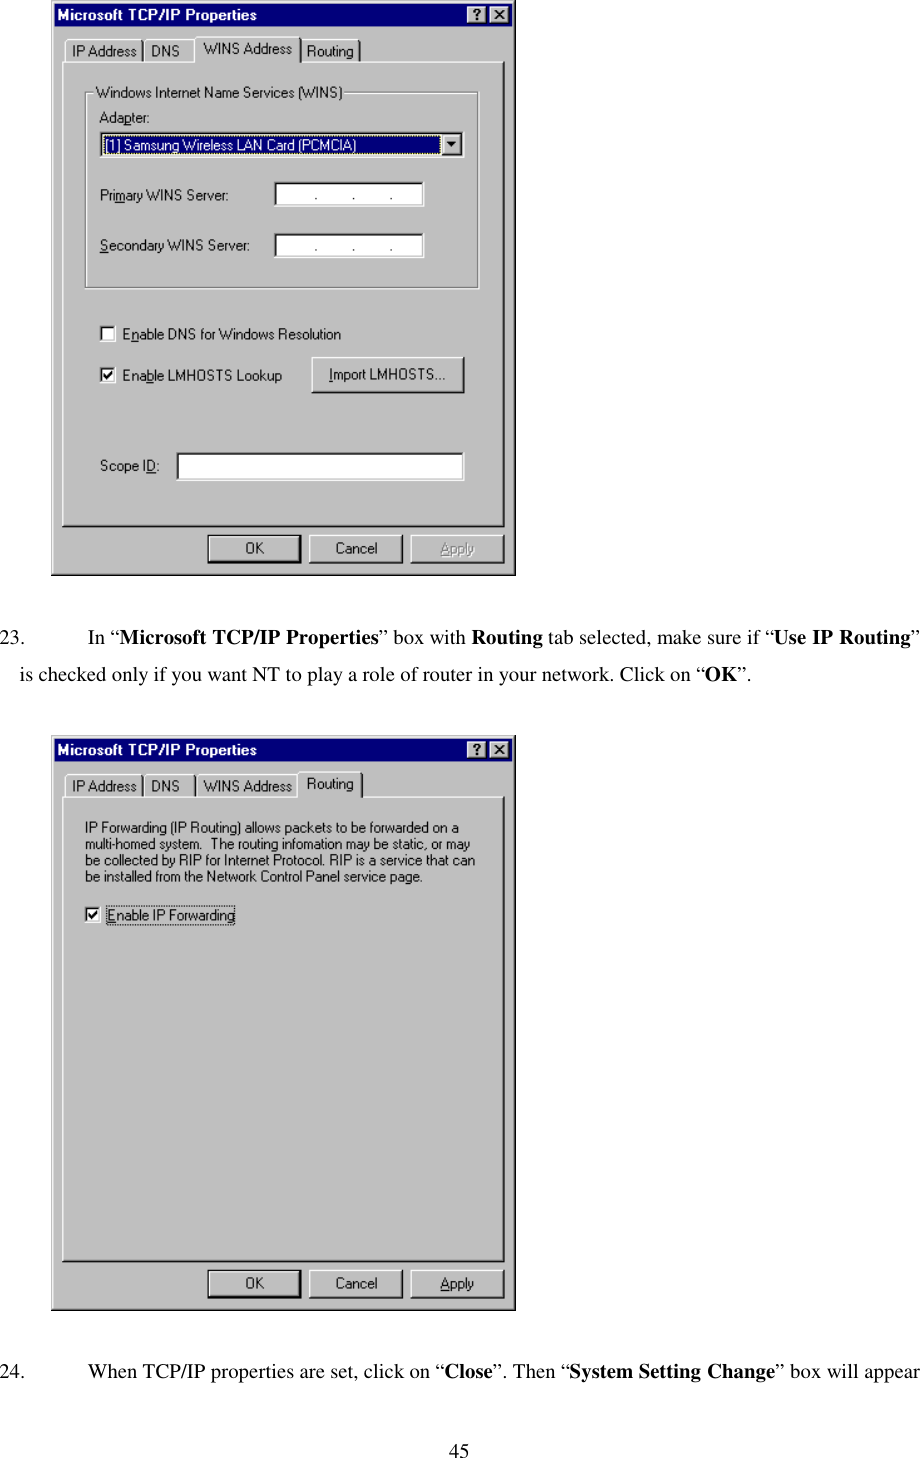   45              23. In “Microsoft TCP/IP Properties” box with Routing tab selected, make sure if “Use IP Routing” is checked only if you want NT to play a role of router in your network. Click on “OK”.               24.  When TCP/IP properties are set, click on “Close”. Then “System Setting Change” box will appear 